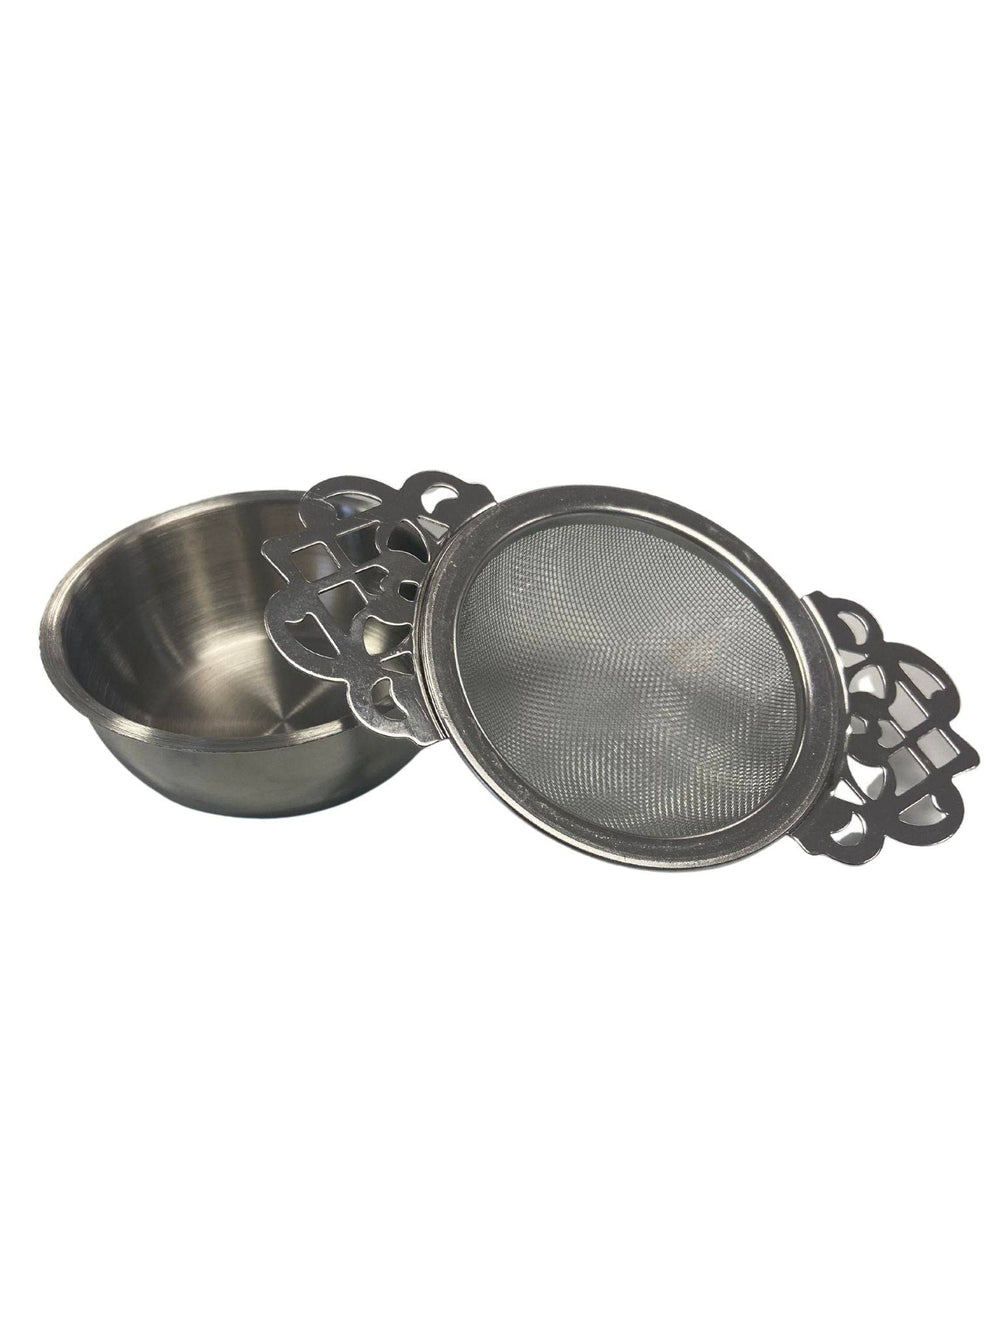 Mesh Tea Strainer With Drip Bowl - Country Life Natural Foods